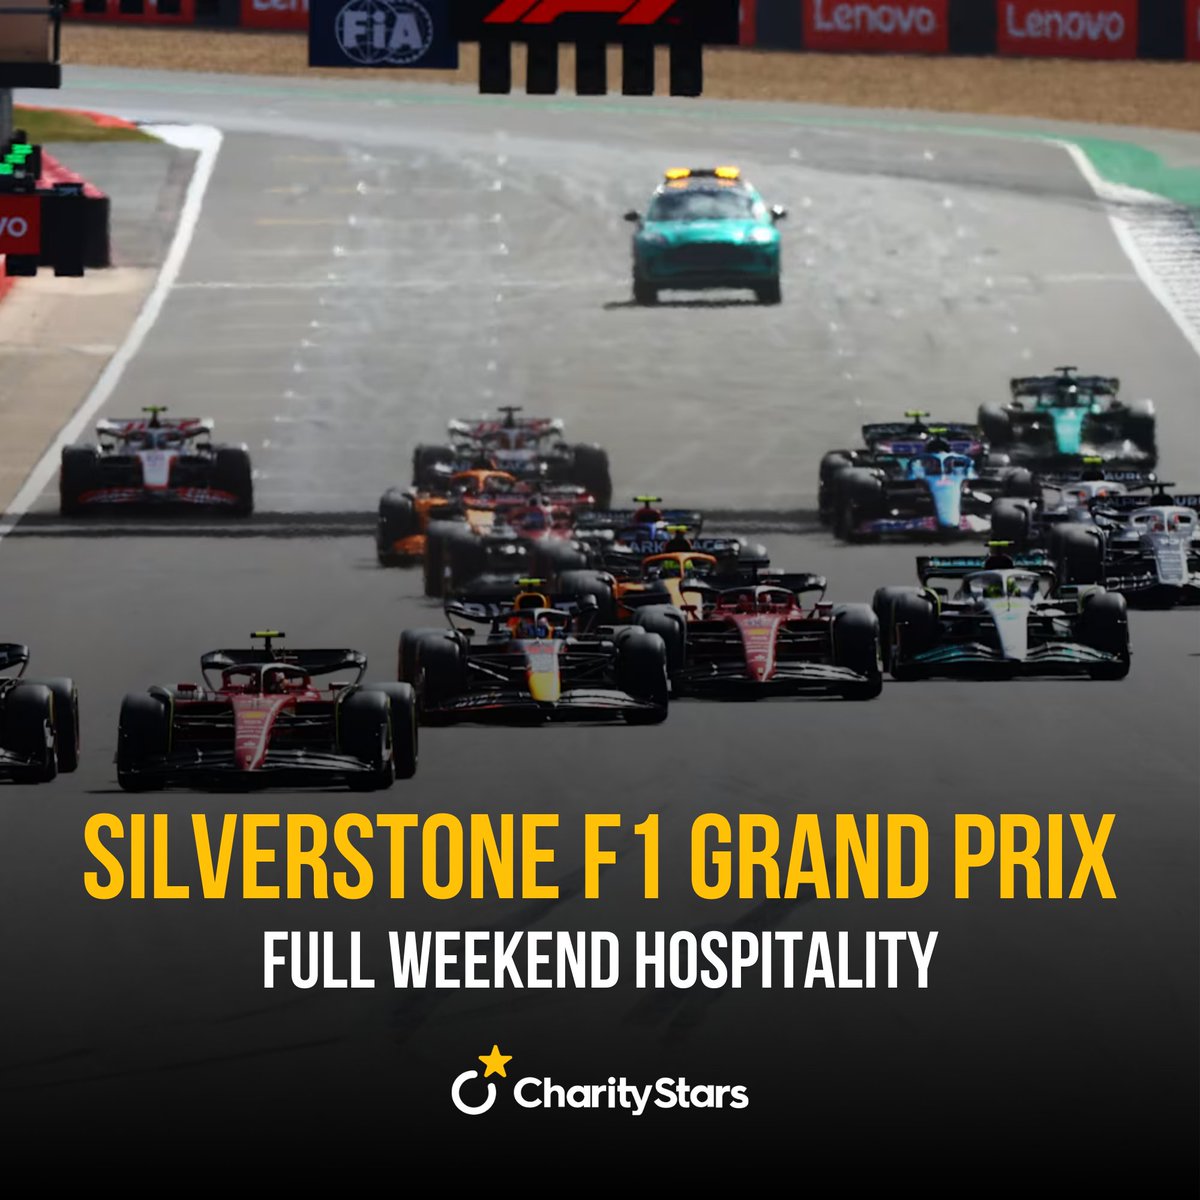 👀 Don't miss your chance to witness the biggest single sporting event in the UK and 🏎 experience the thrill of Silverston F1 Gran Prix with this super hospitality experience for two people. Place your bid now! 👉 charitystars.com/product/silver… #CharityStars #Formula1 #SilverstoneGP